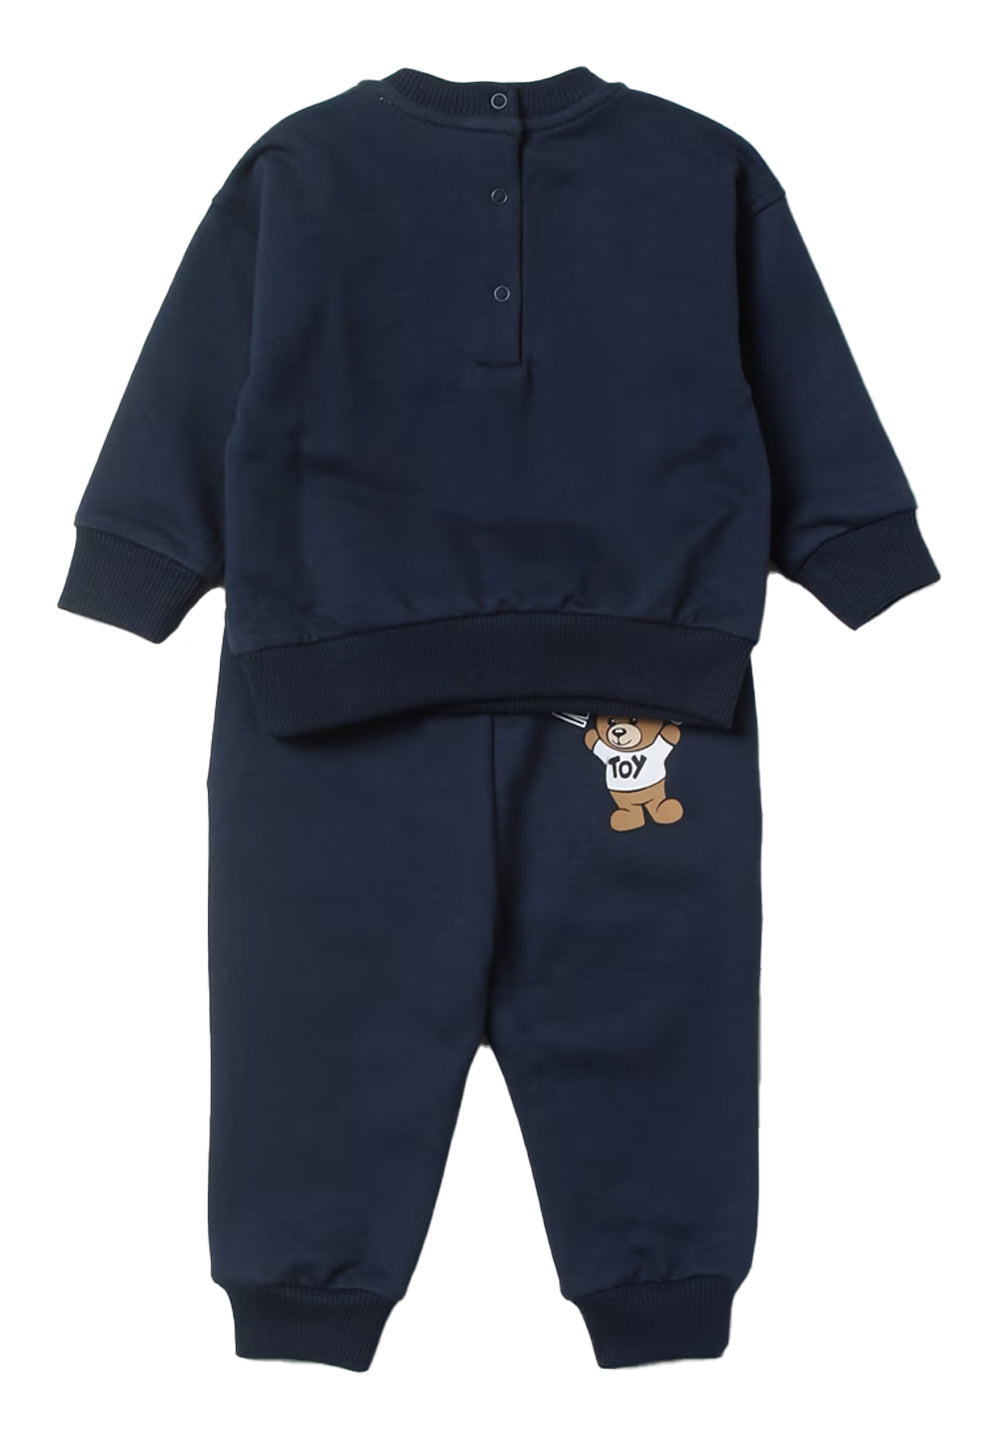 Navy blue suit for boys